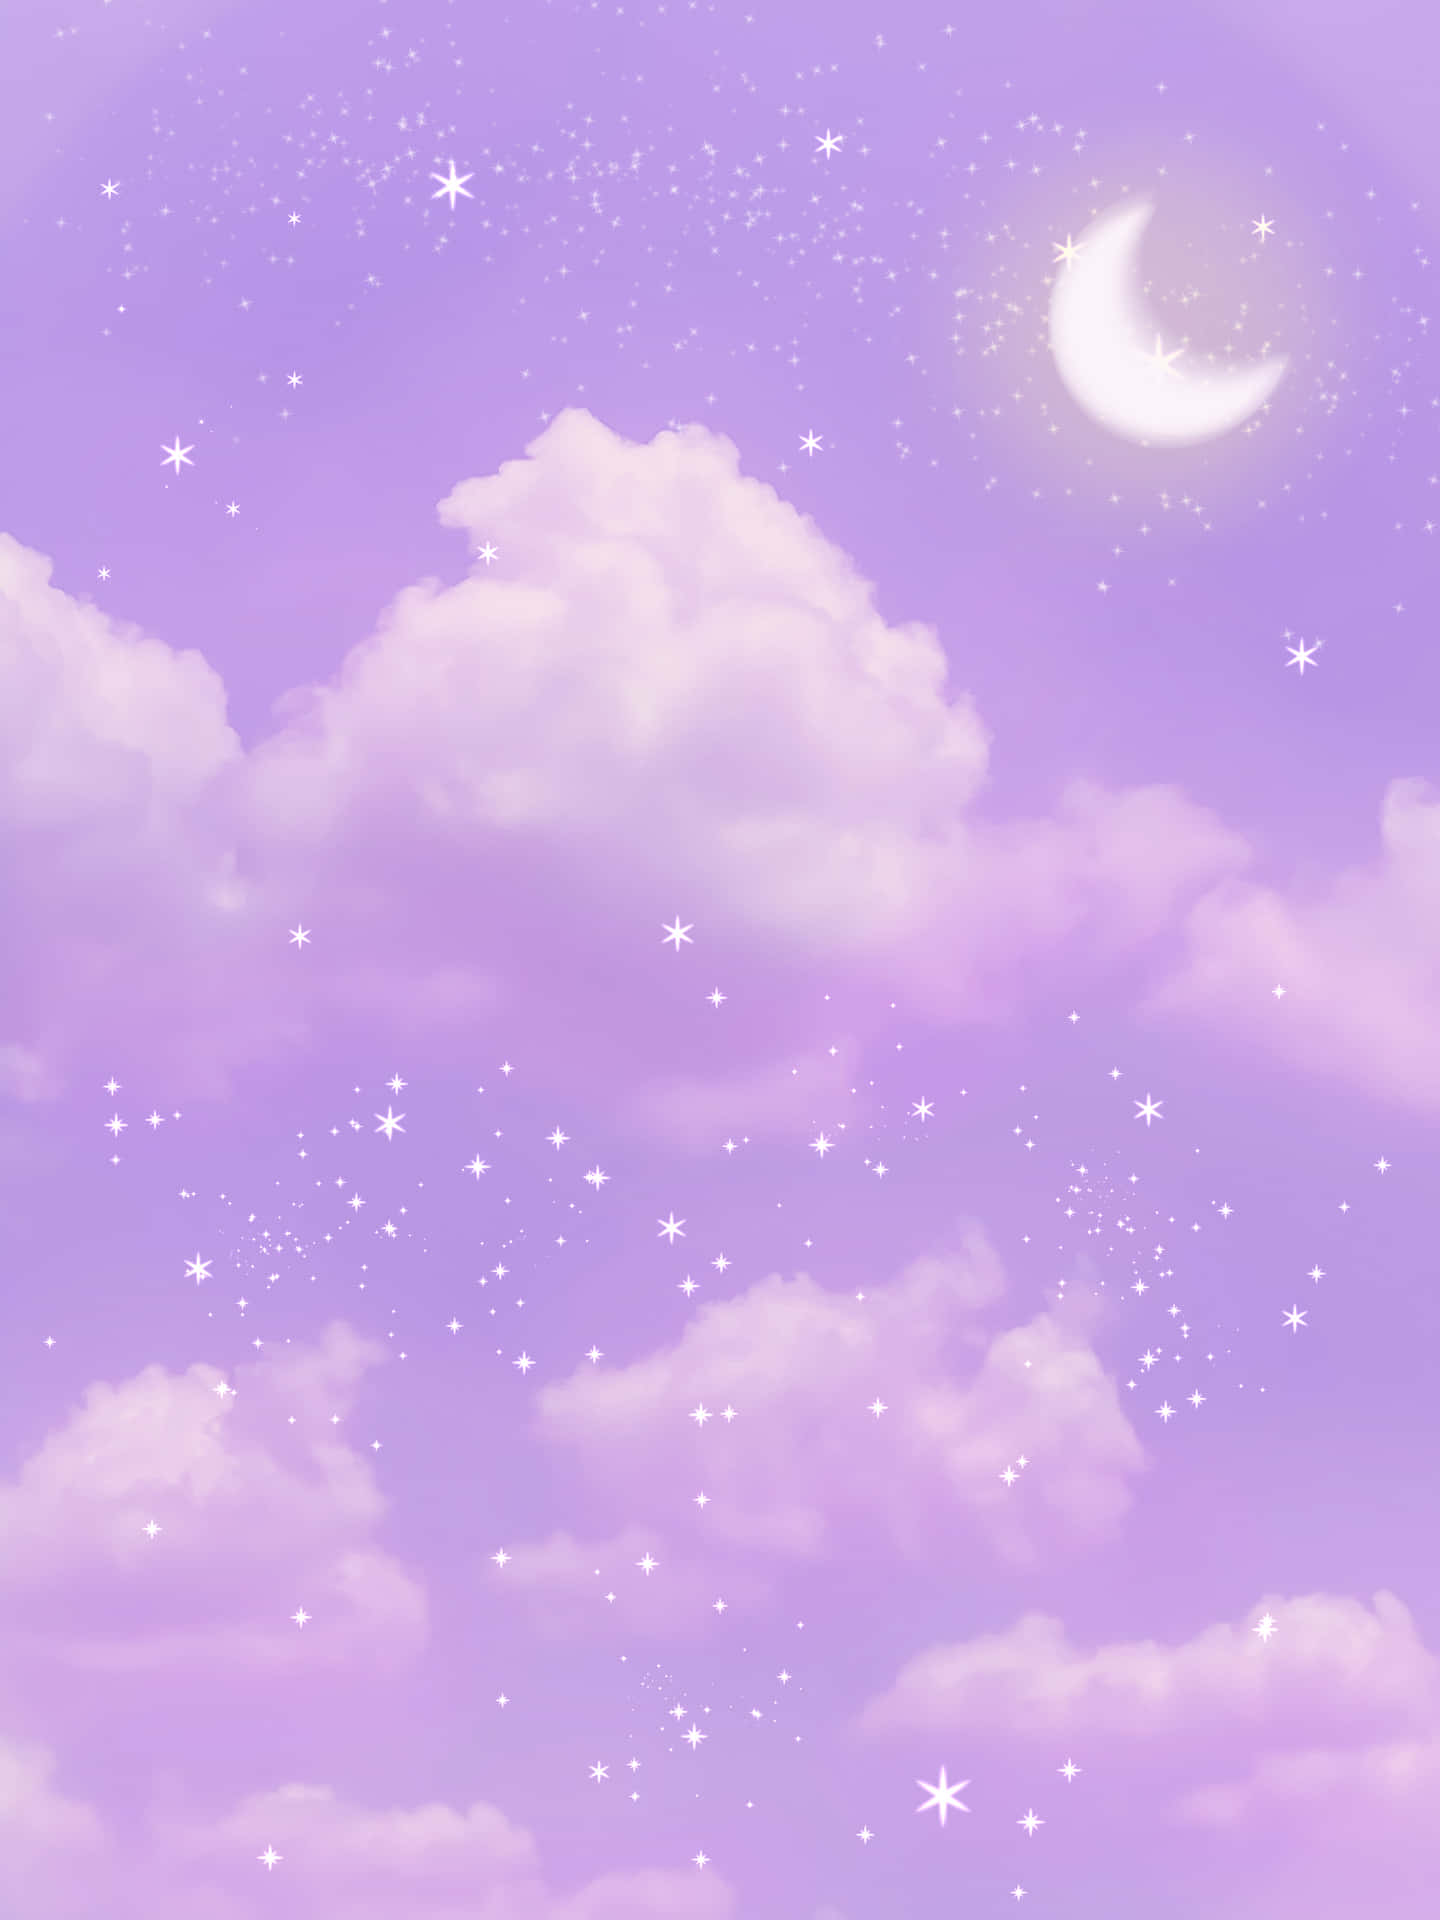 Cute Purple Aesthetic Cloudy Sky With Moon Wallpaper